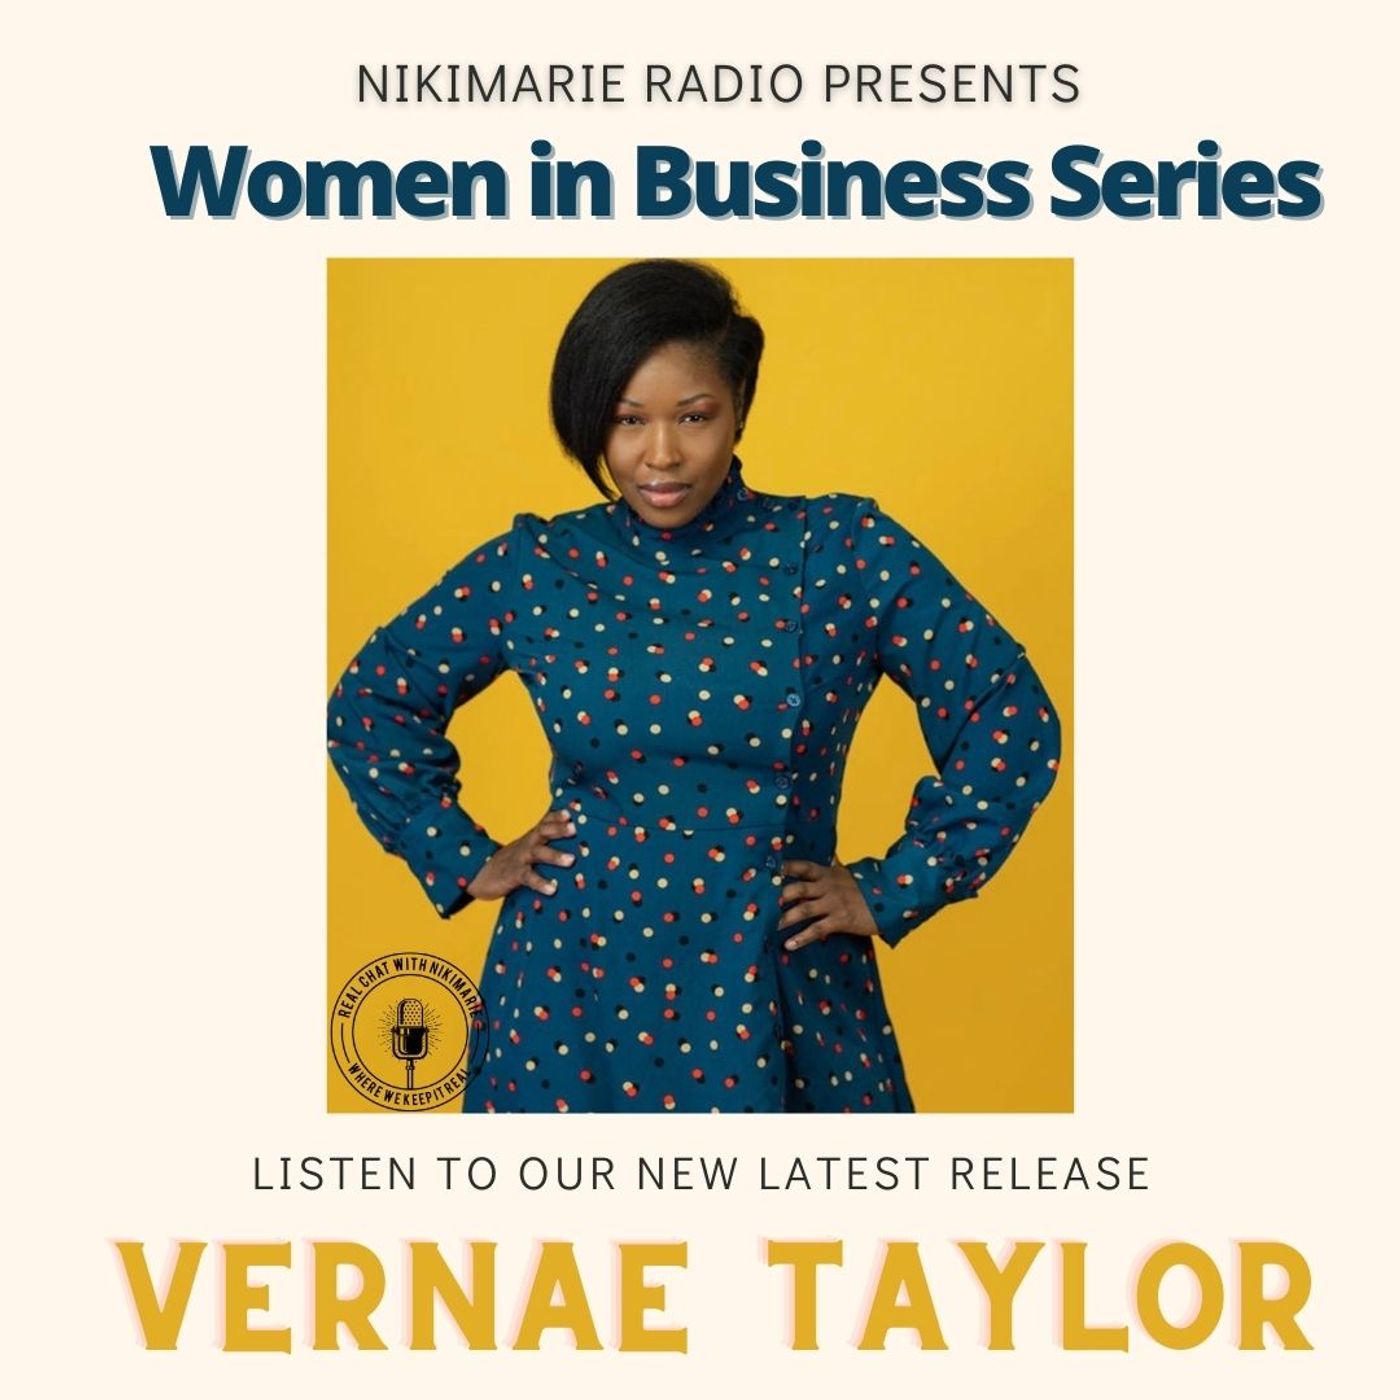 S03 E01: Women In Business Series Part I: Featuring Authorpreneur, Vernae Taylor